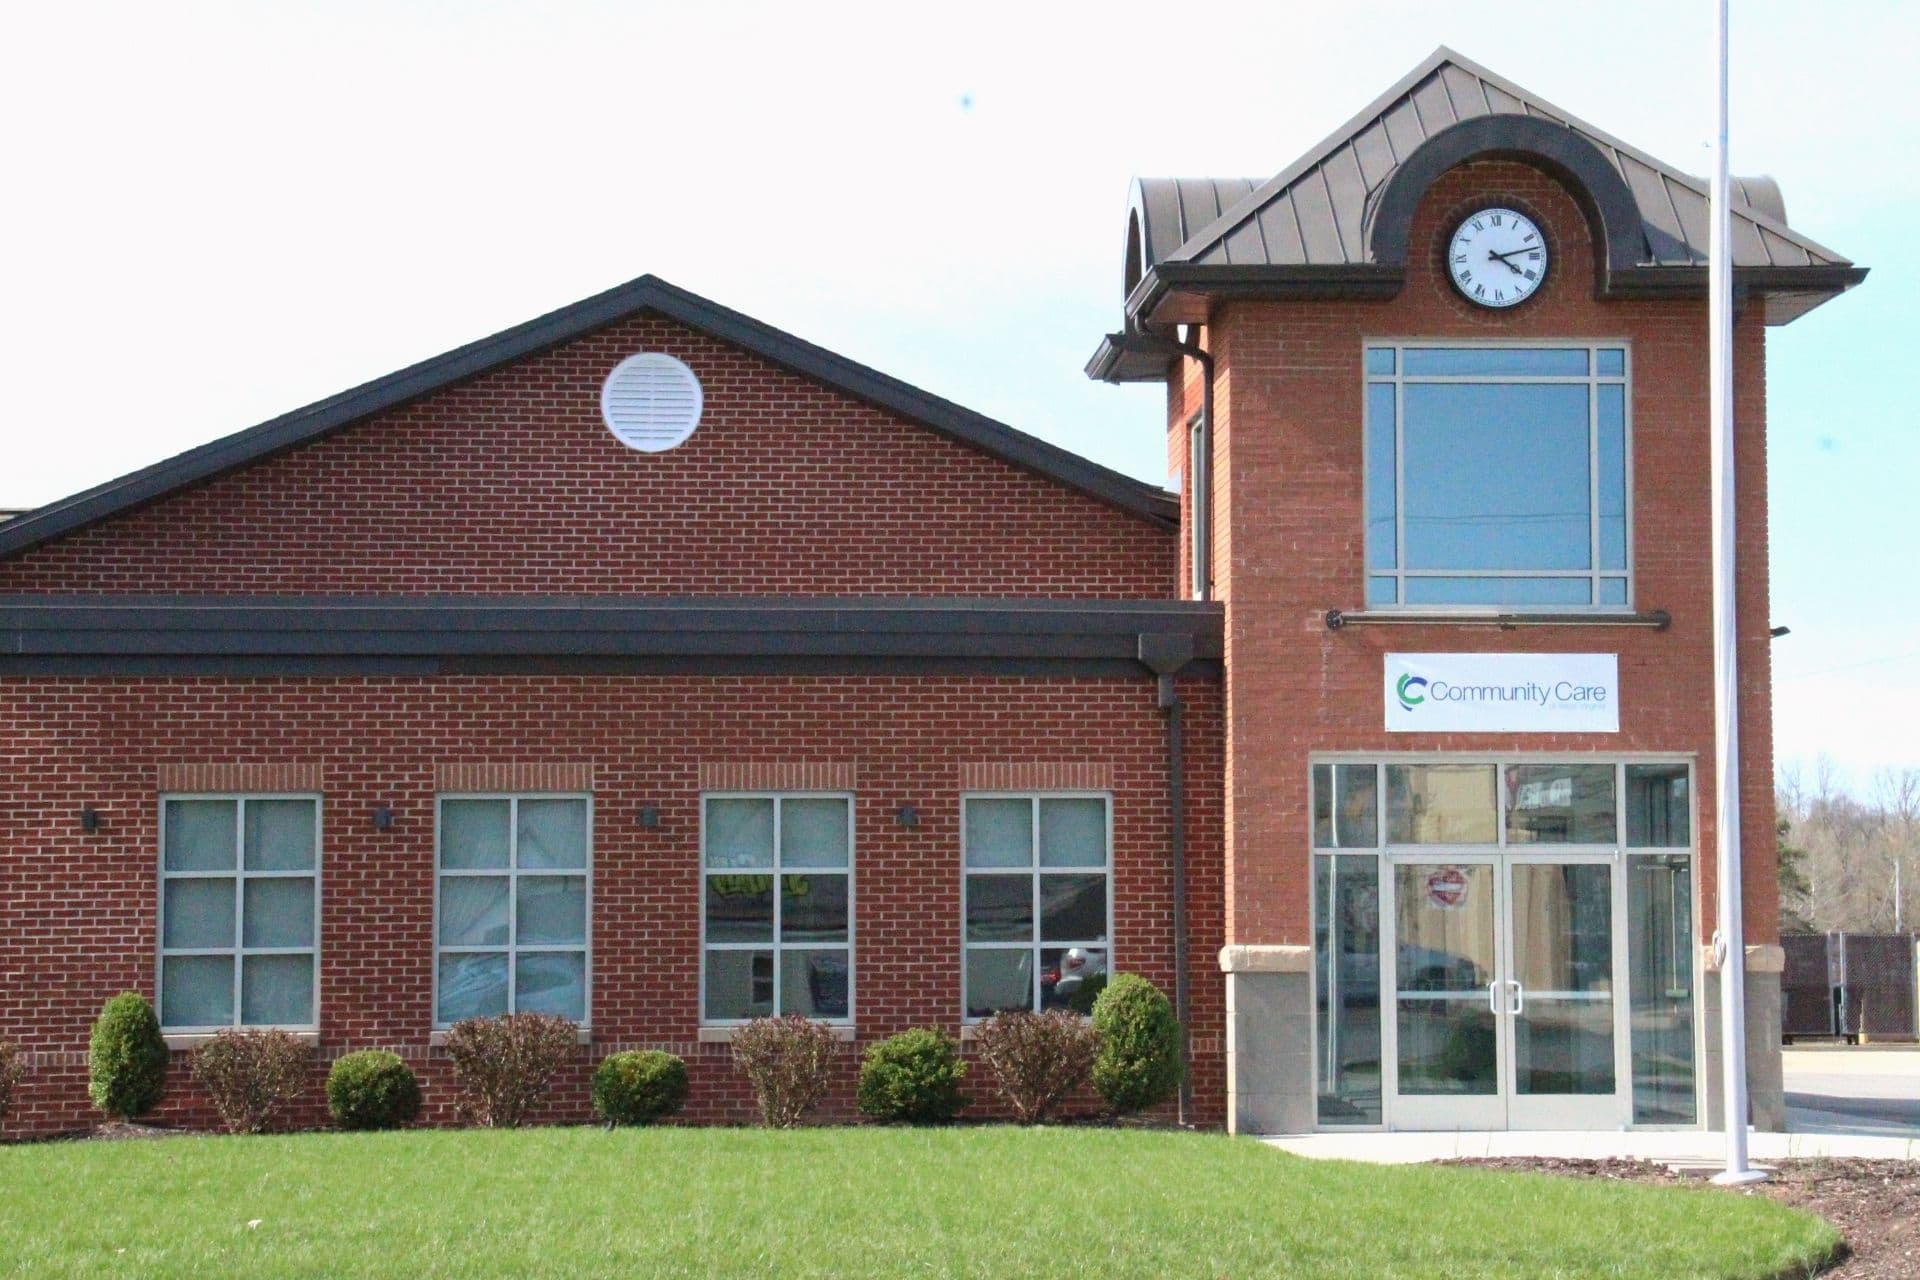 Community Care of West Virginia has purchased the former Citizens Bank branch on West Main Street in Buckhannon.